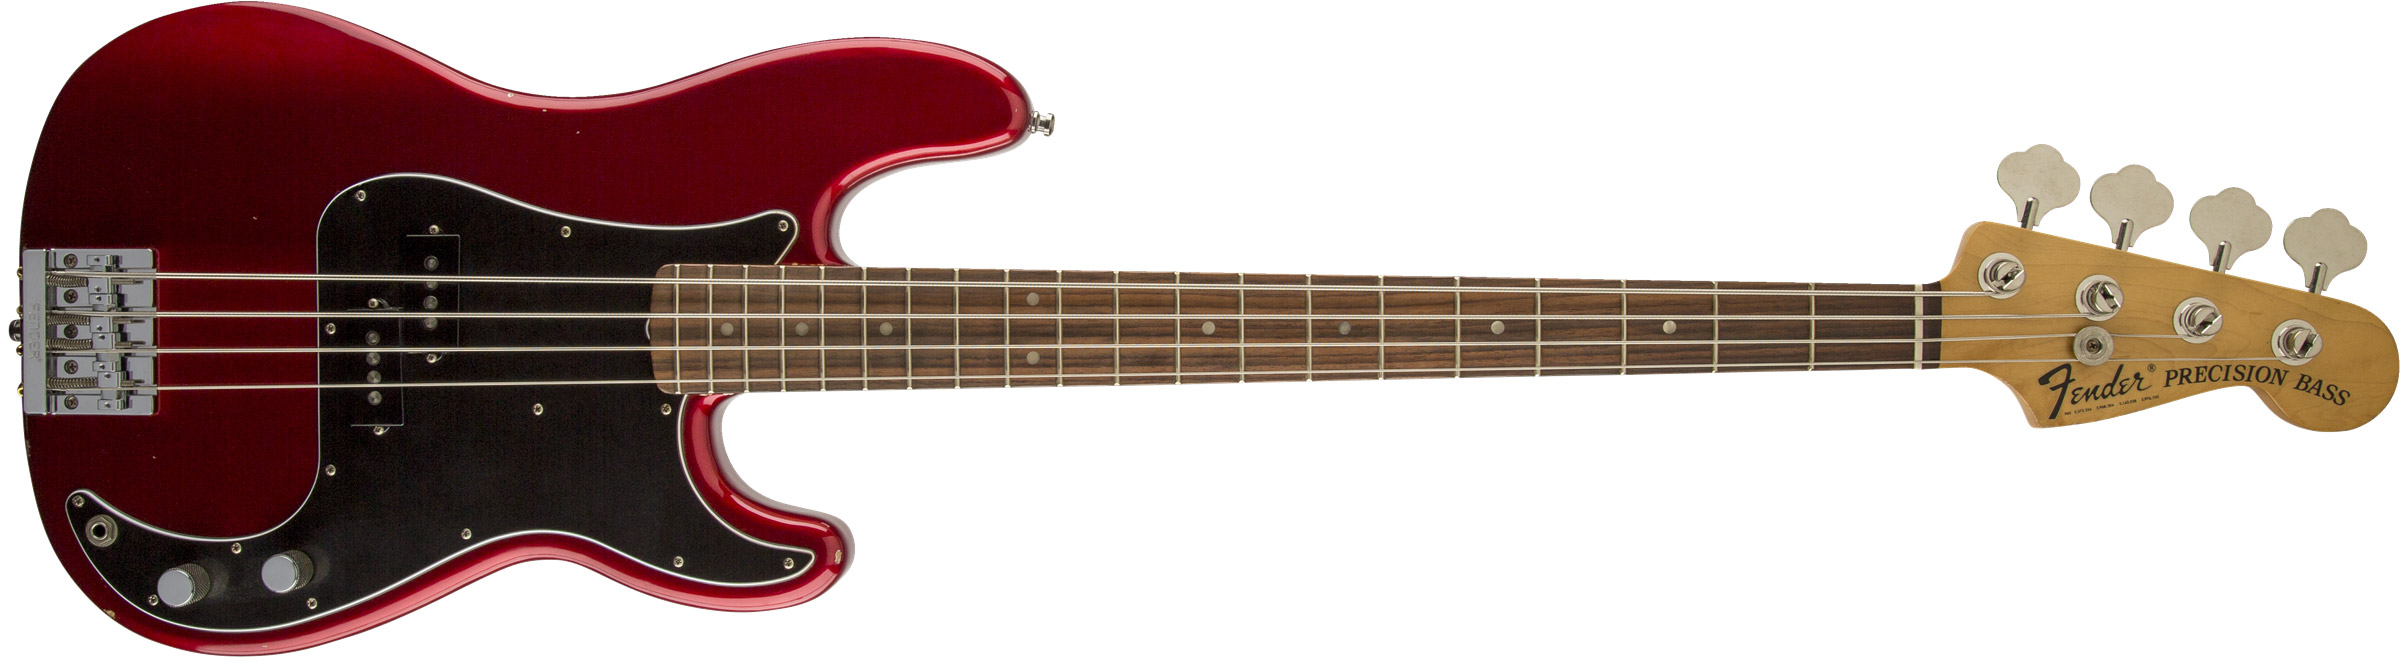 CONTRABAIXO FENDER SIG SERIES NATE MENDEL P BASS 014-2500-309 CANDY APPLE RED